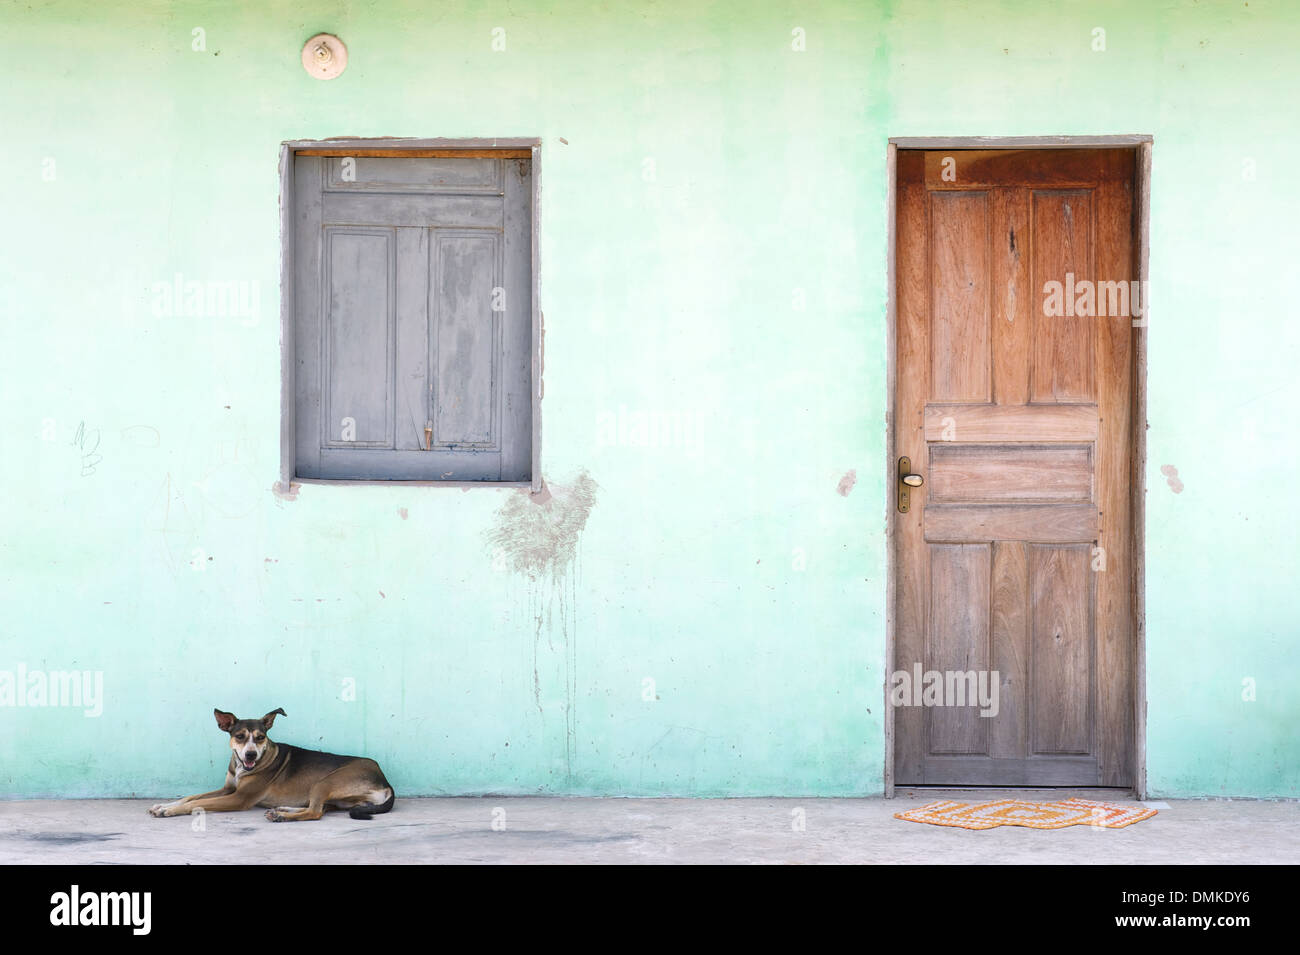 Brazilian dog lying on sidewalk in front of typical simple tropical village home in Nordeste Brazil Stock Photo